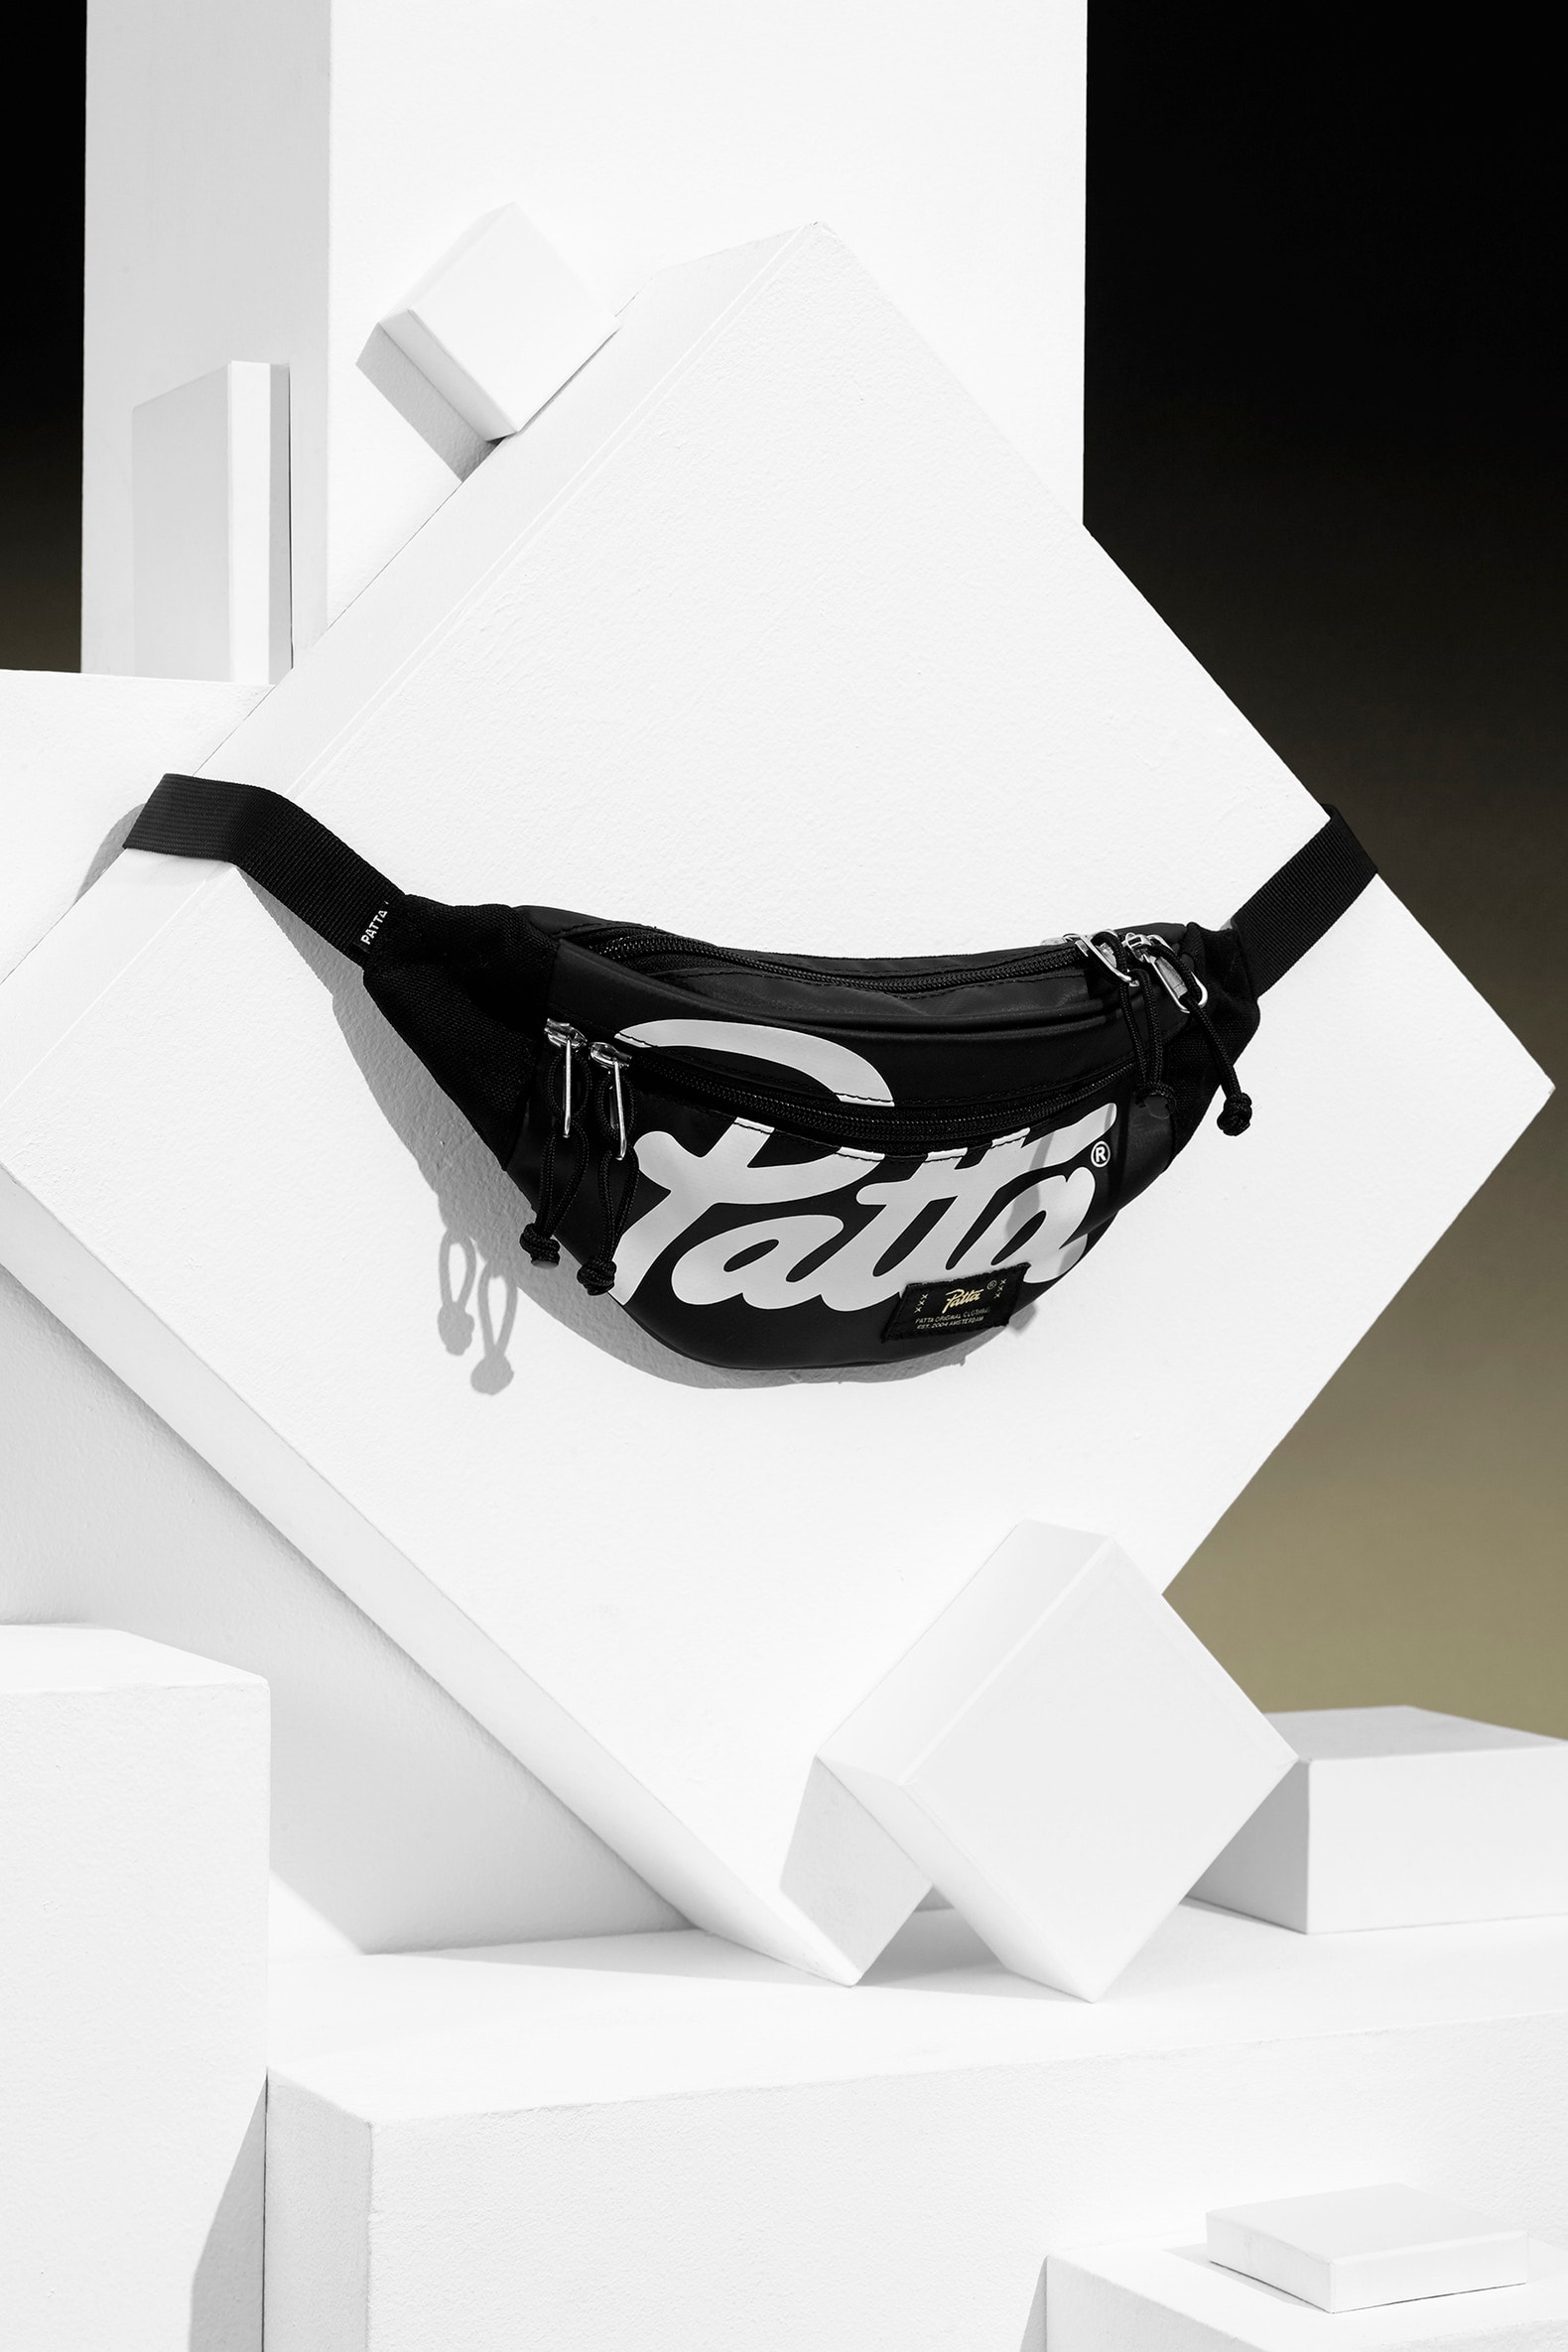 Patta Luggage Collection 2017 Fall/Winter